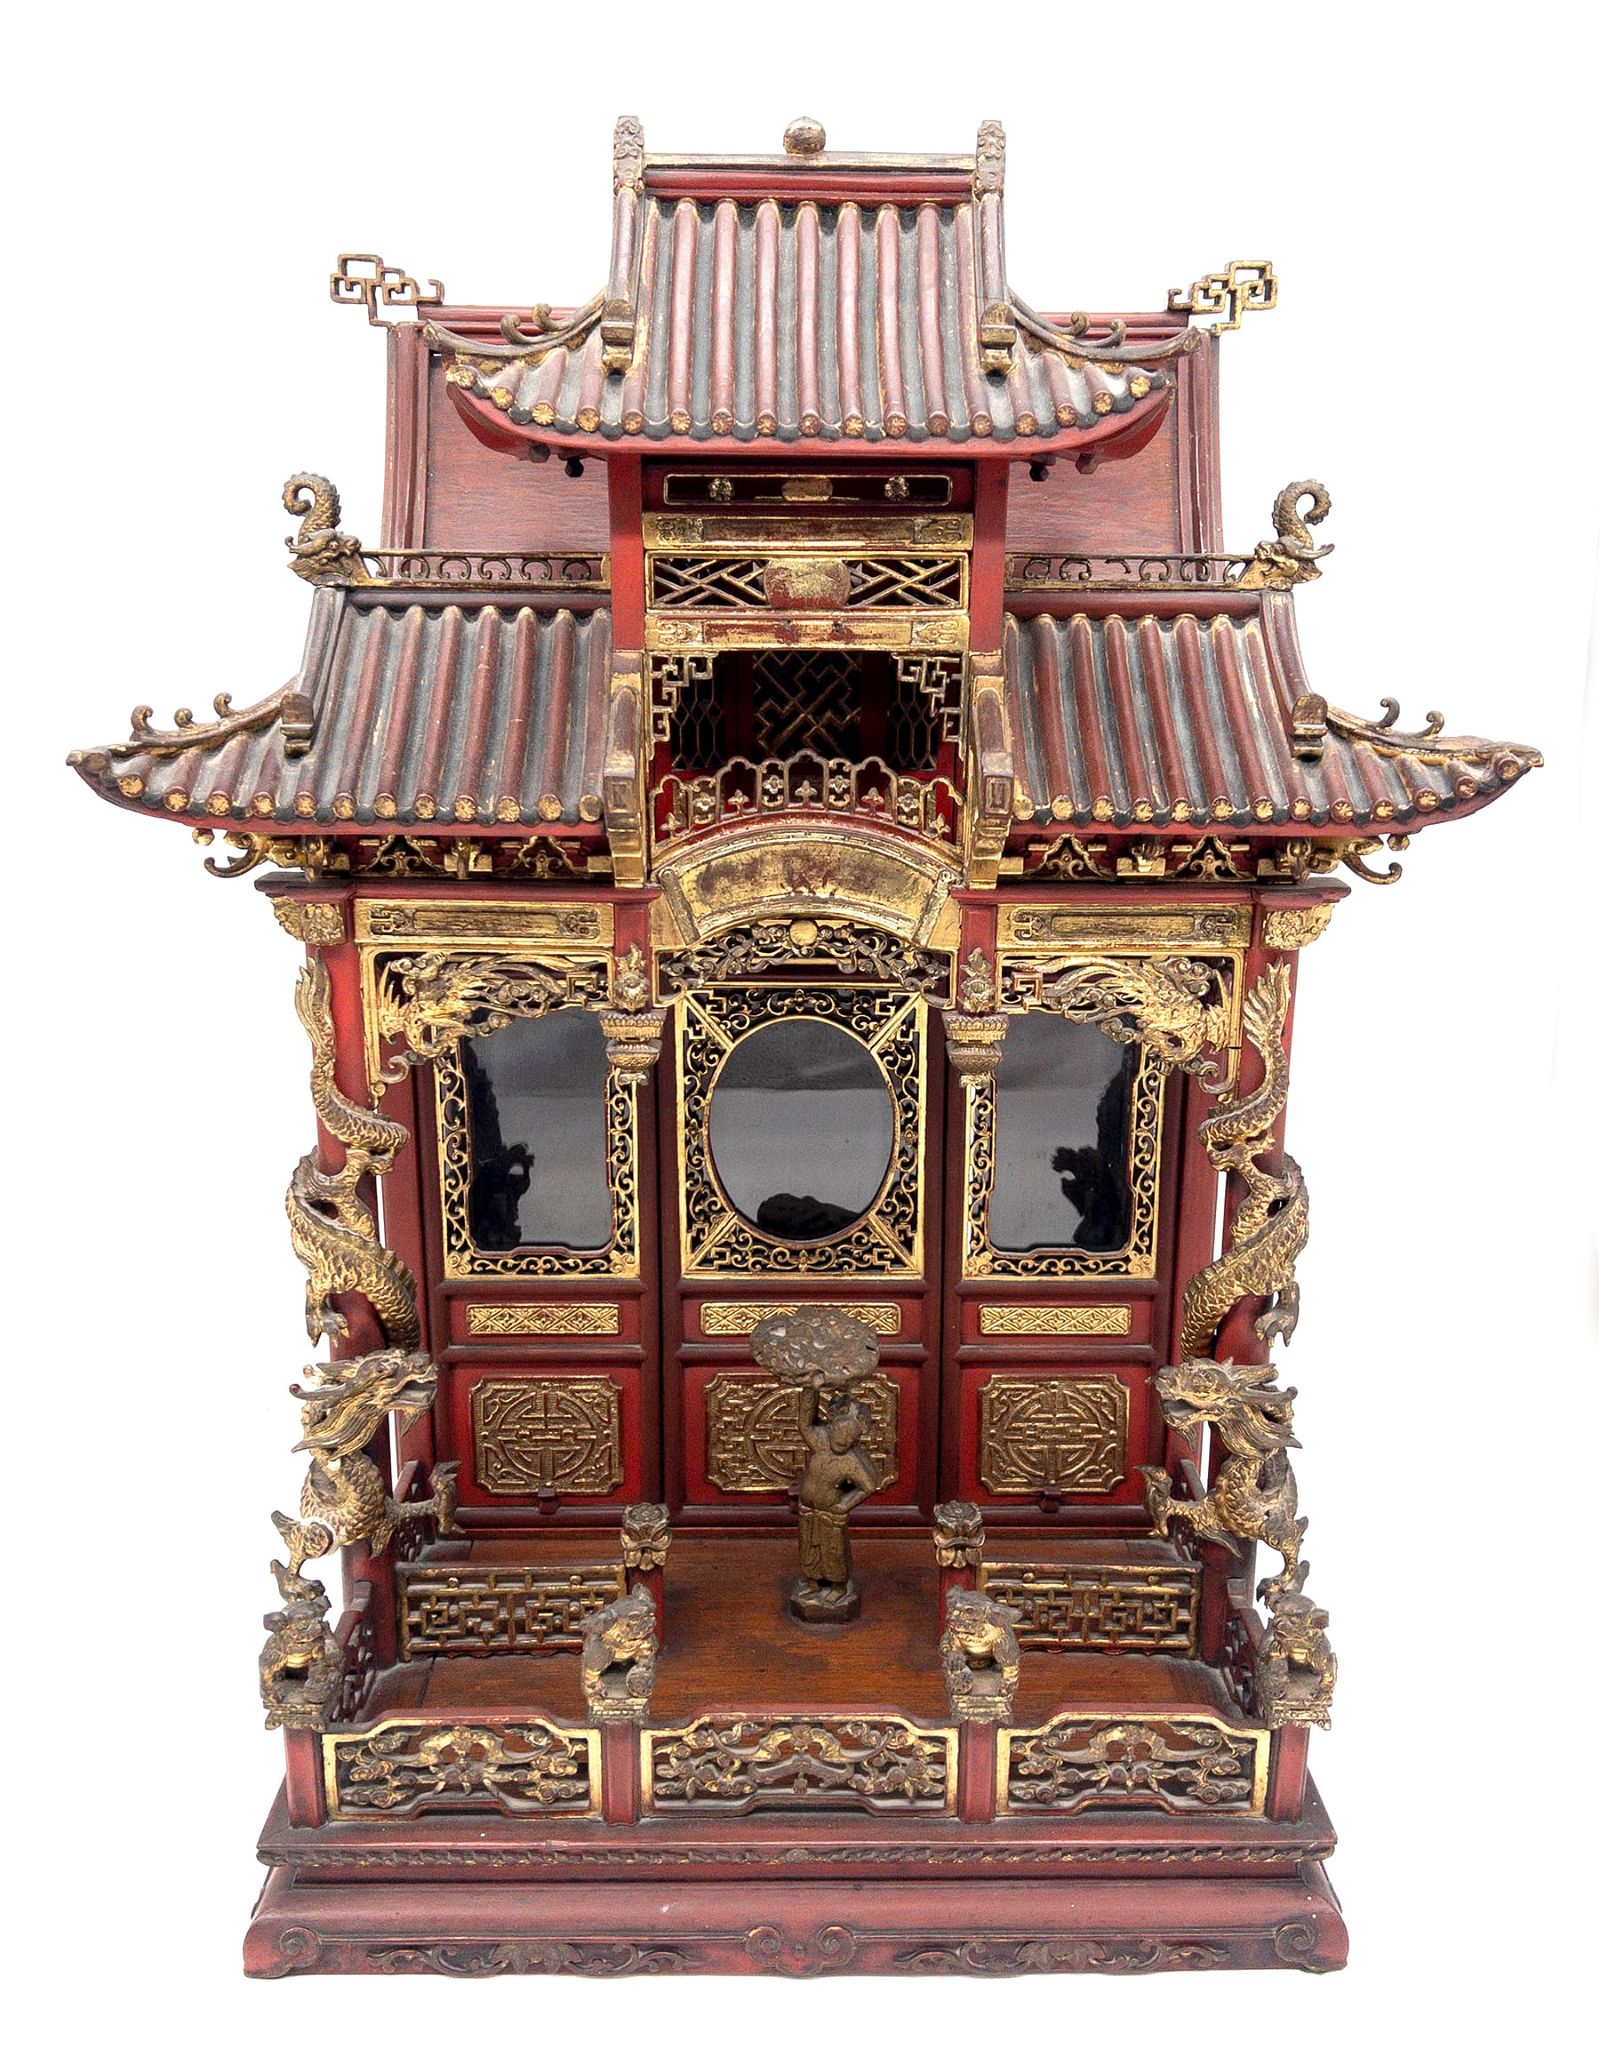 CHINESE RED LACQUER MINIATURE PAGODA 3d23de